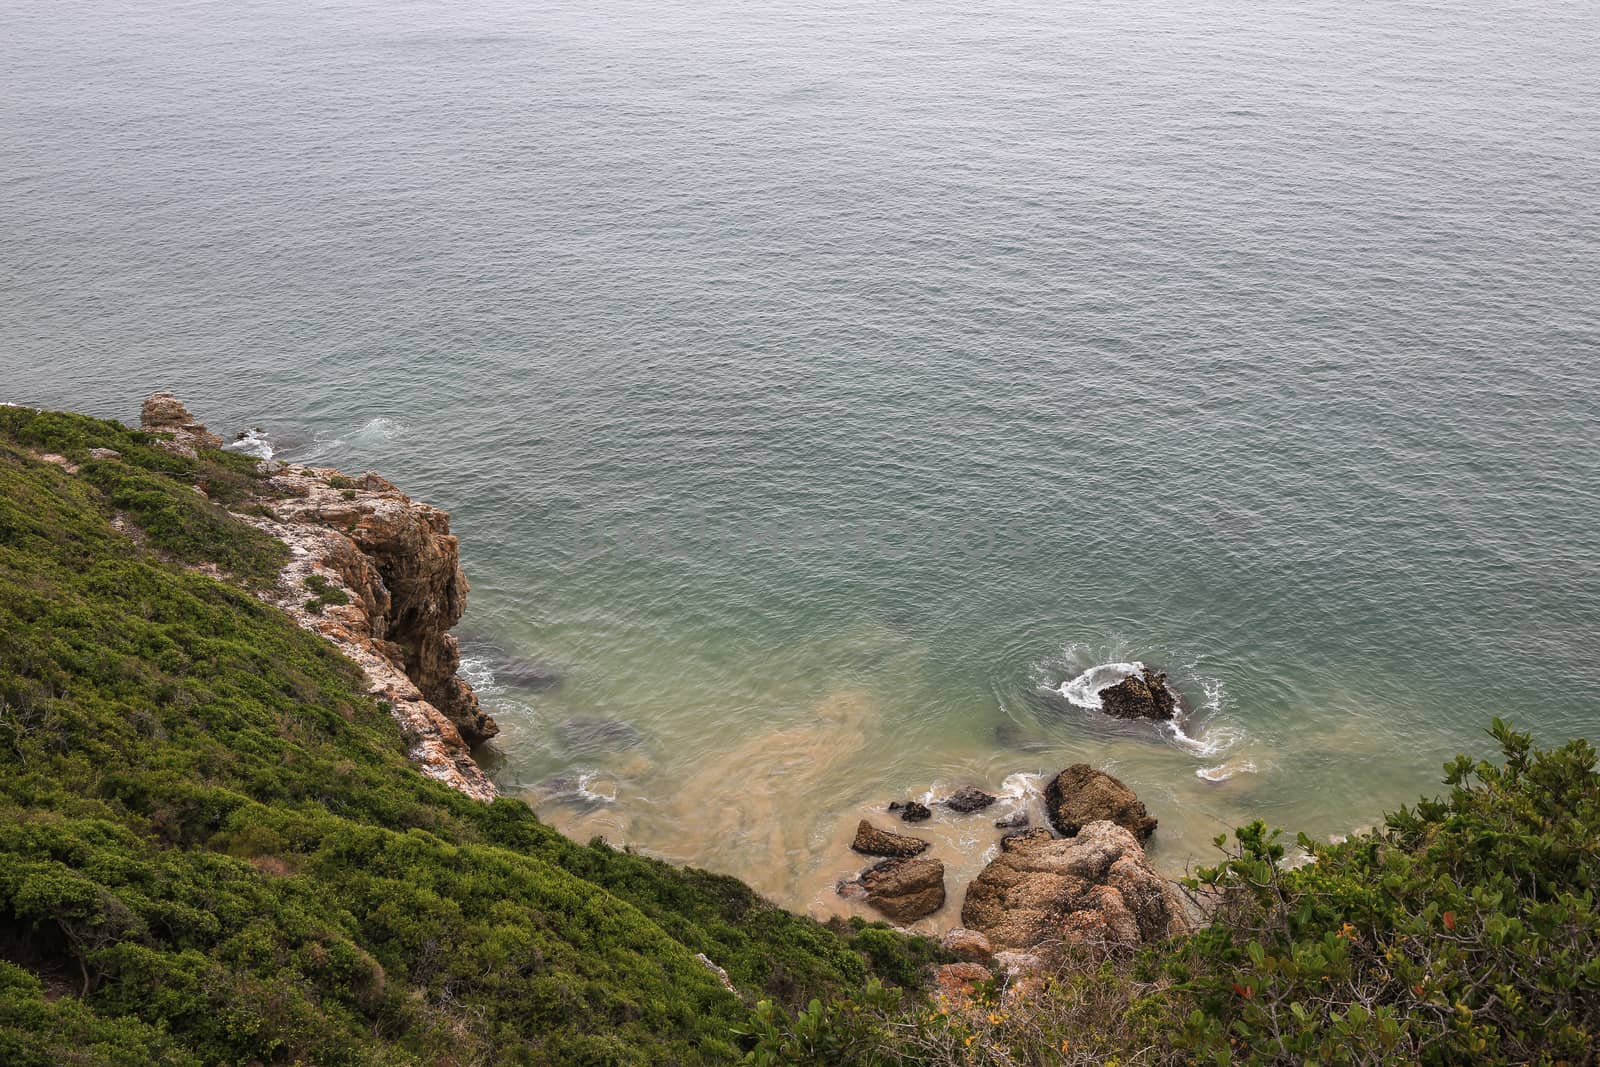 Seascape with rocks and vegetation at the coast in South Africa